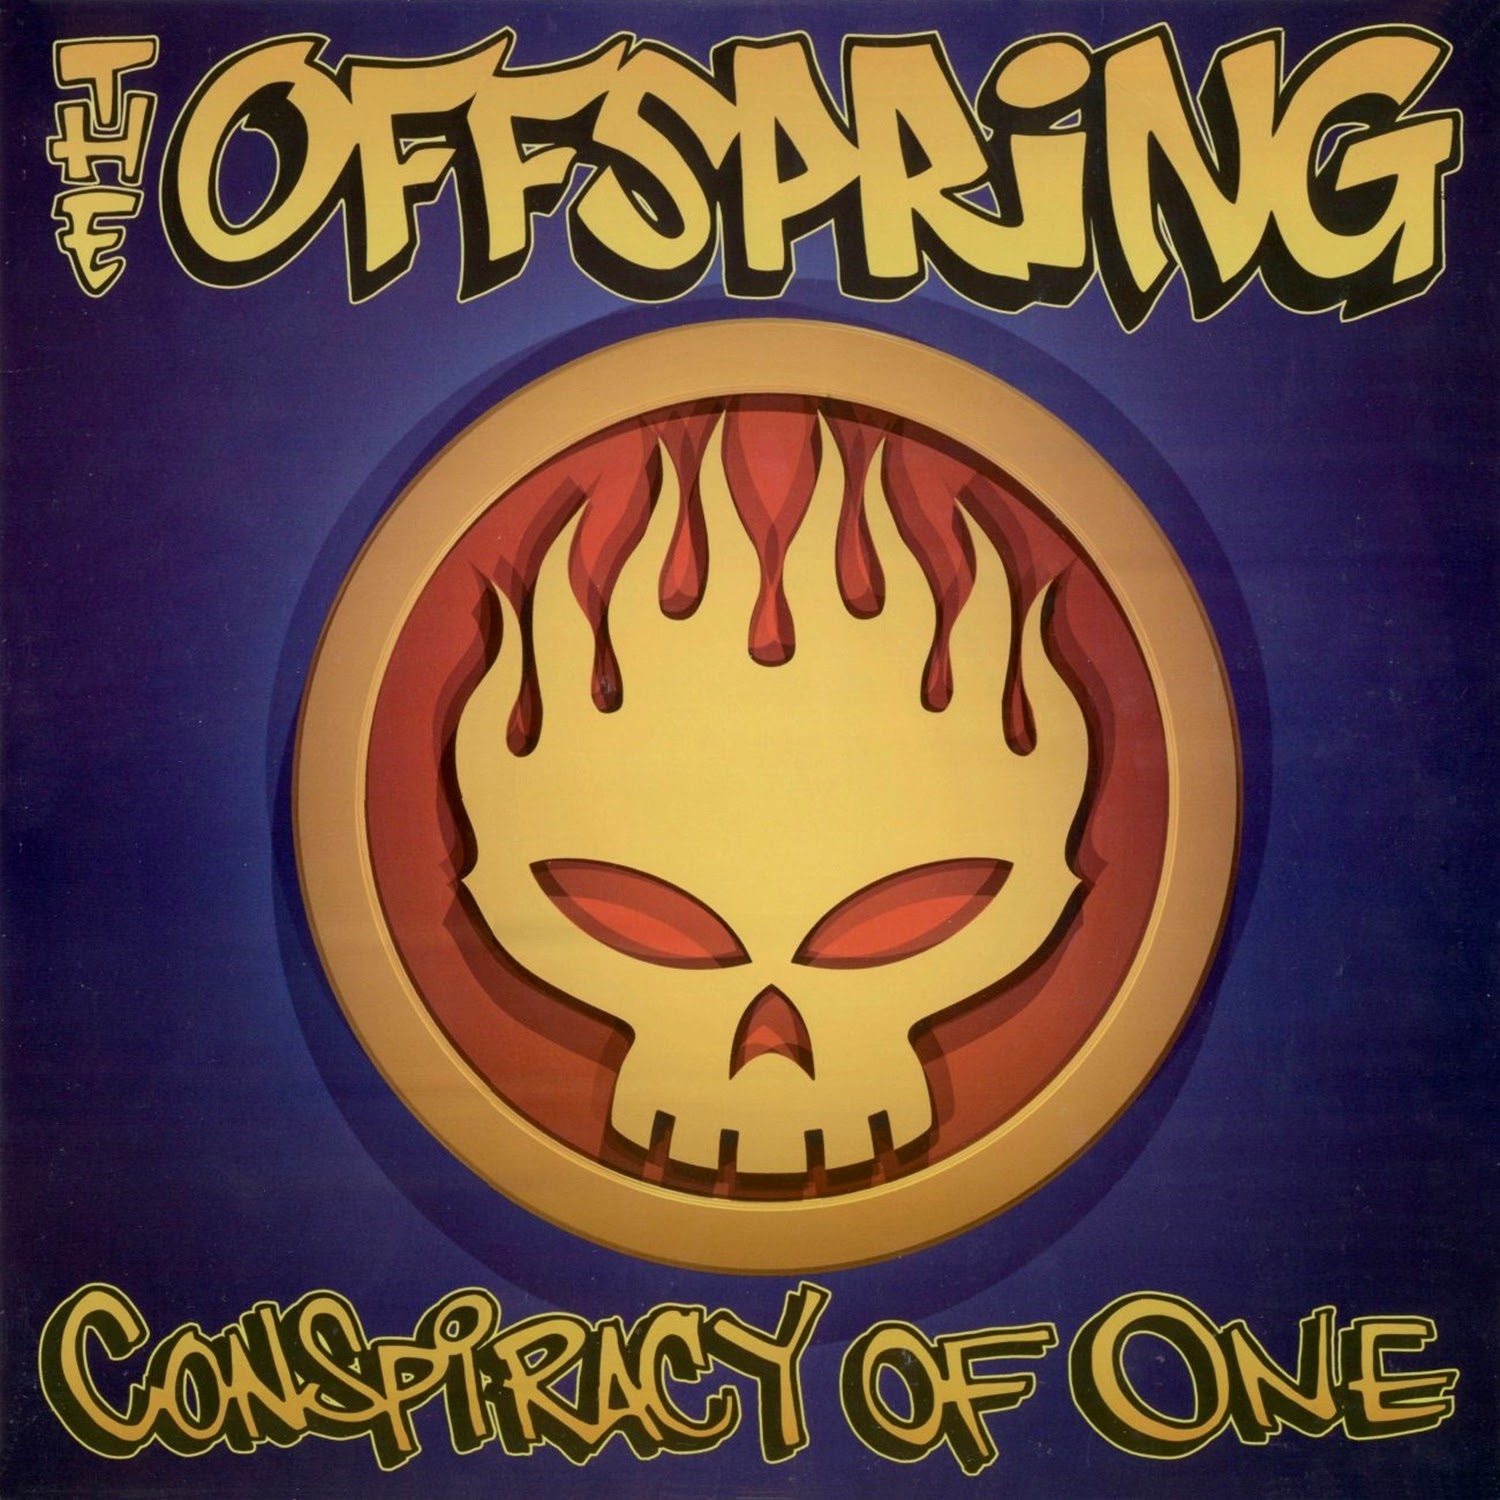 2000 Conspiracy Of One - The Offspring - Rockronología